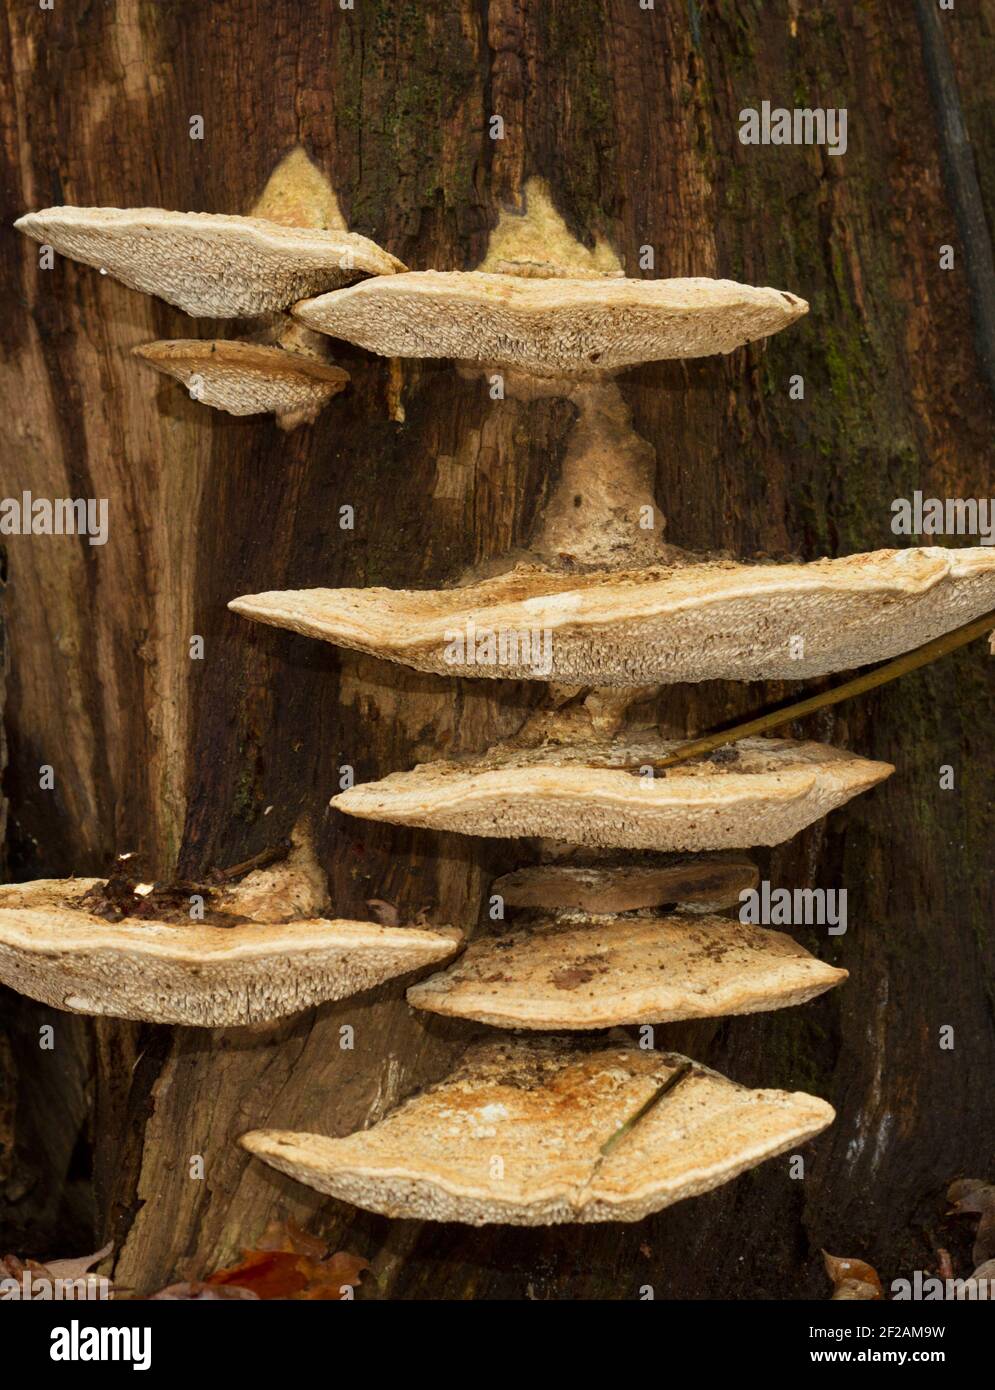 Several fruit bodies of a white bracket fungus, probably Lumpy bracket, on a rotting Beech stump Stock Photo